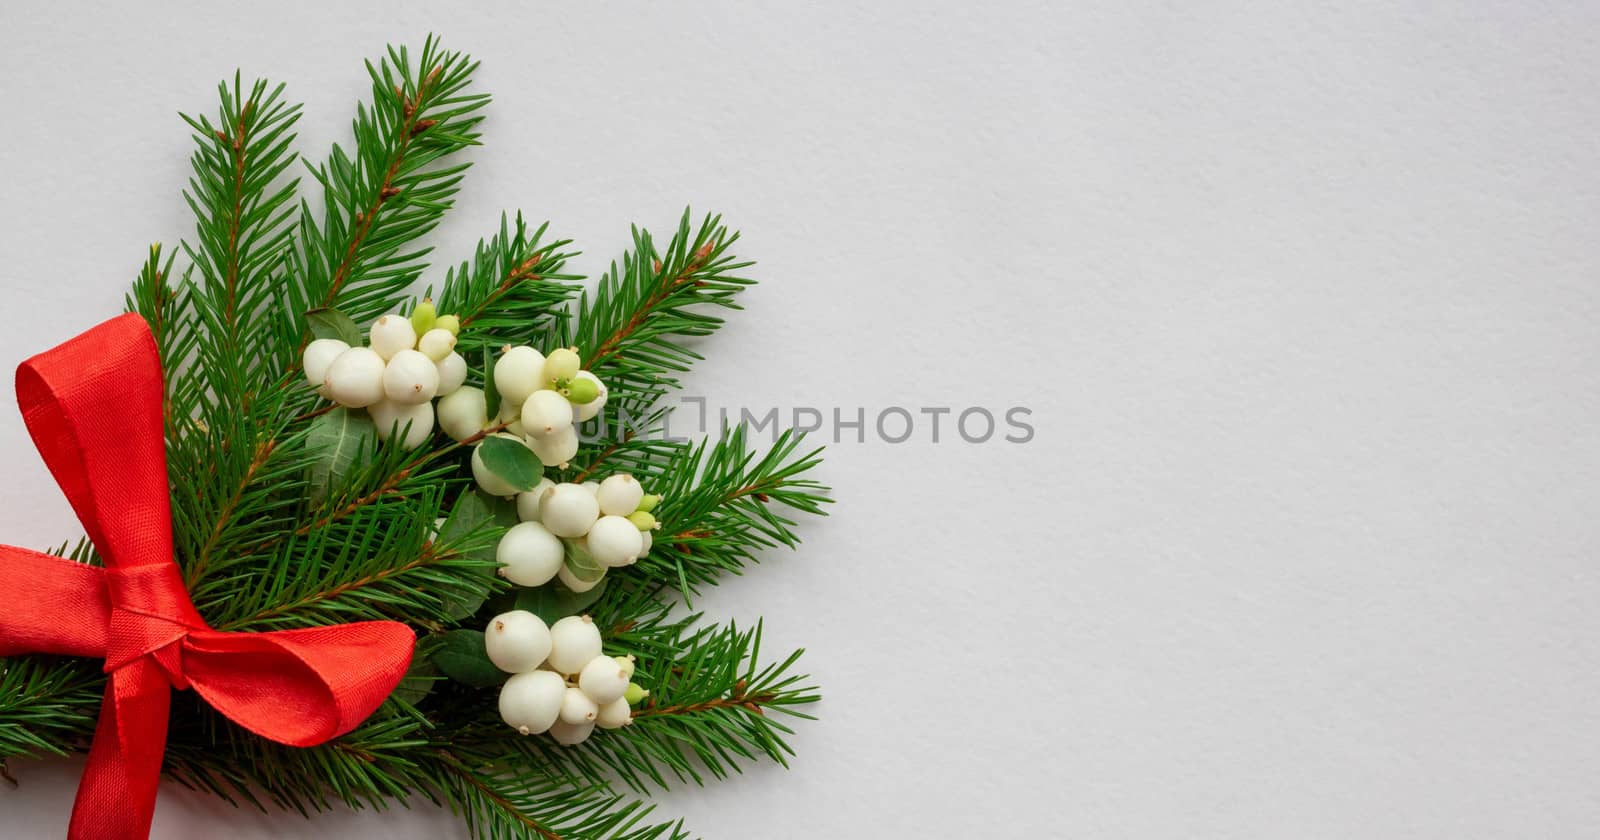 Christmas bouquet with fir branches, red bow and white dogwood berries on a white background . Christmas card. The theme of a winter holiday. Happy New Year.